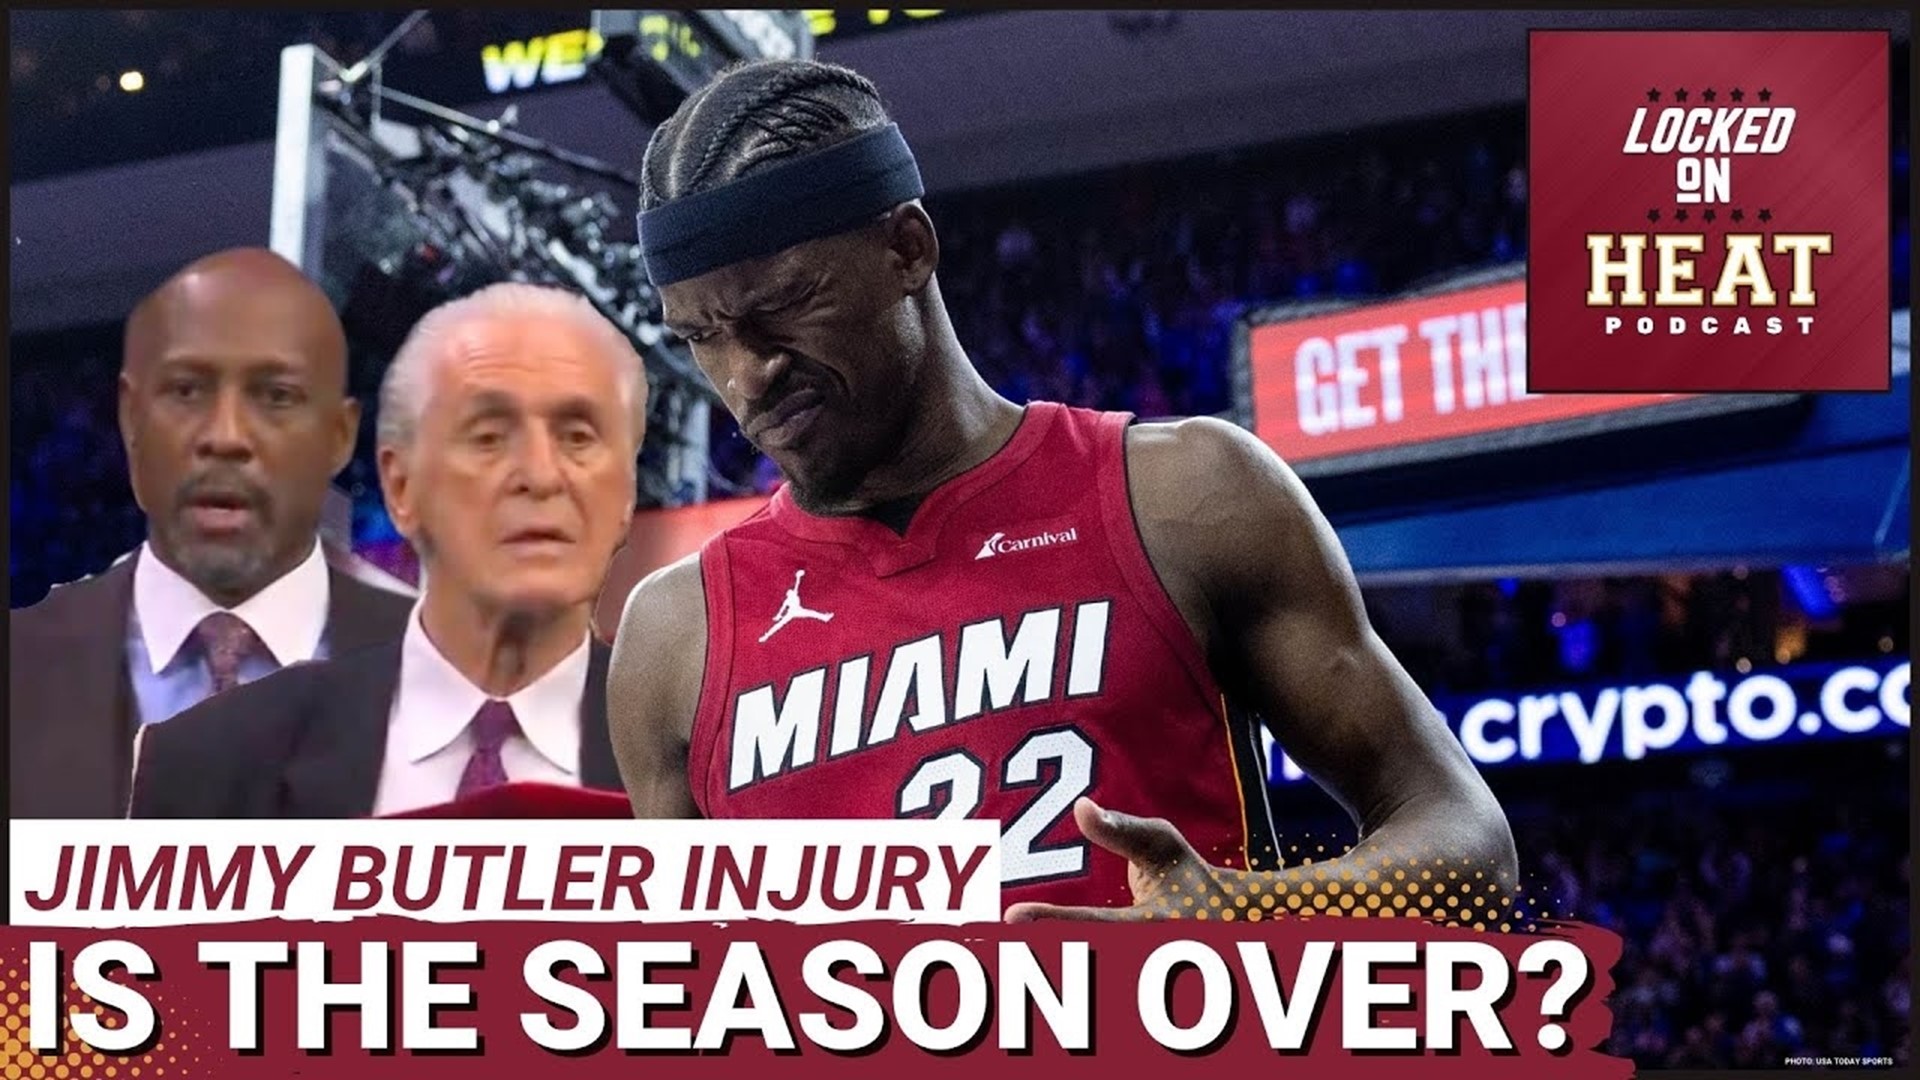 An MRI revealed a sprained MCL for Jimmy Butler, who will be sidelined for several weeks.